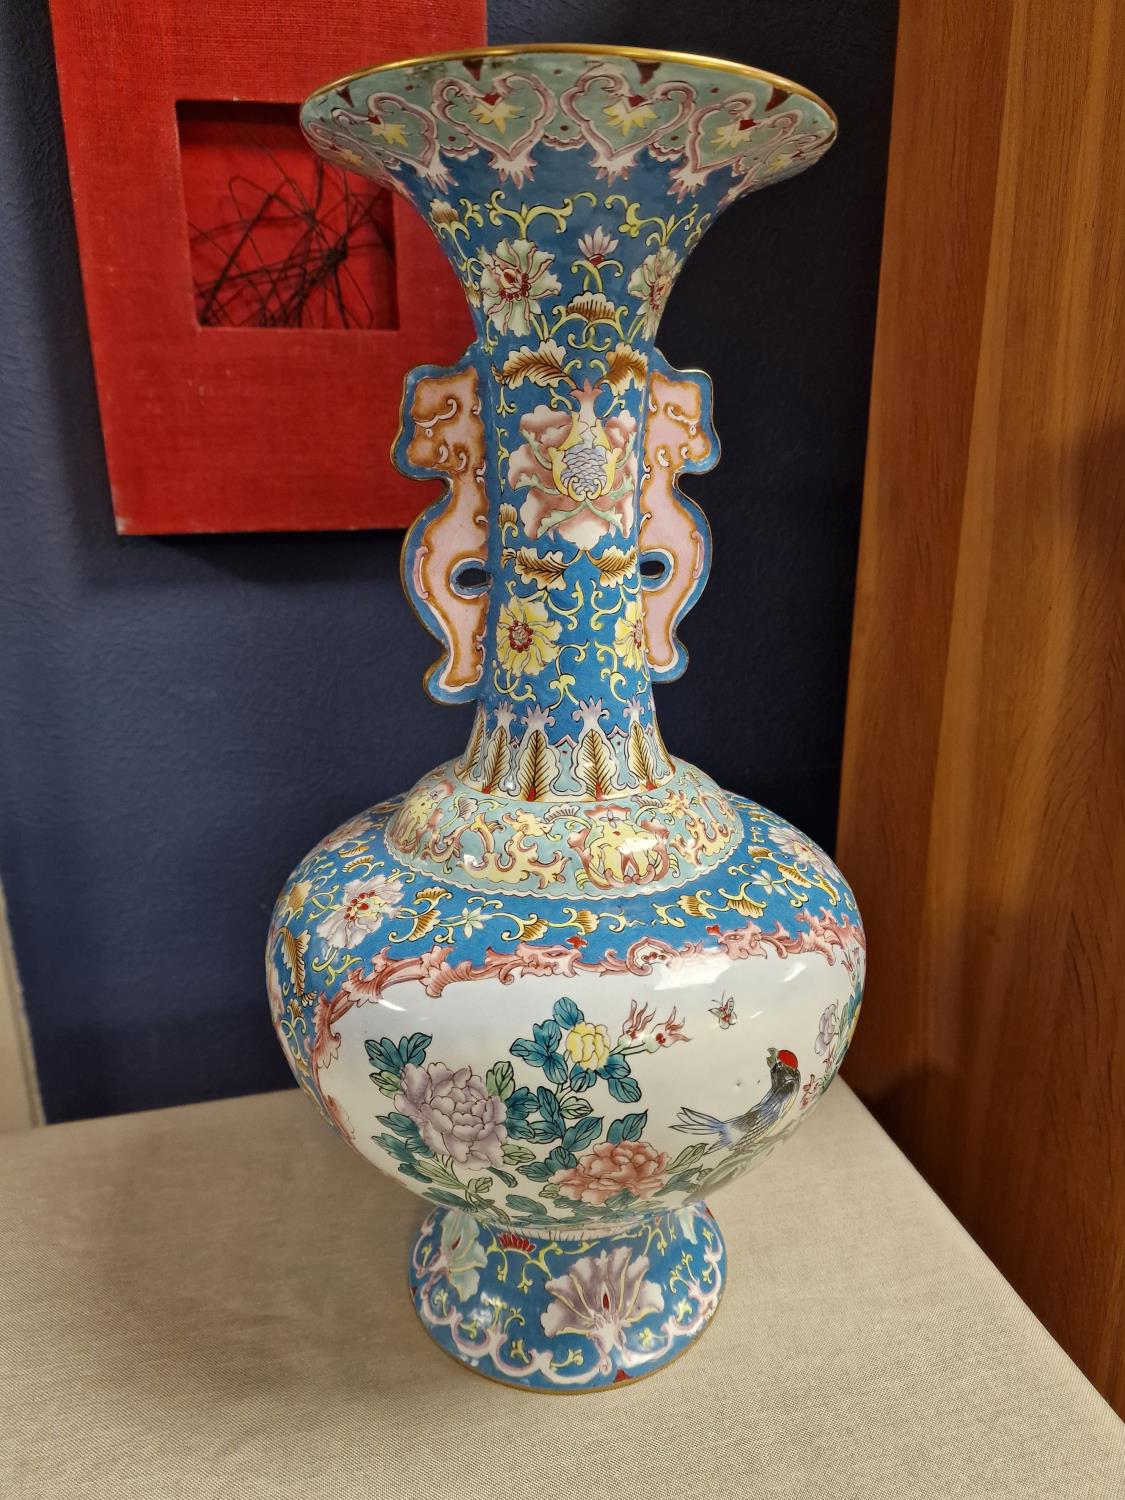 Chinese Early 20th Century Floral/Avian Canton Vase - enamel on copper - 45cm high